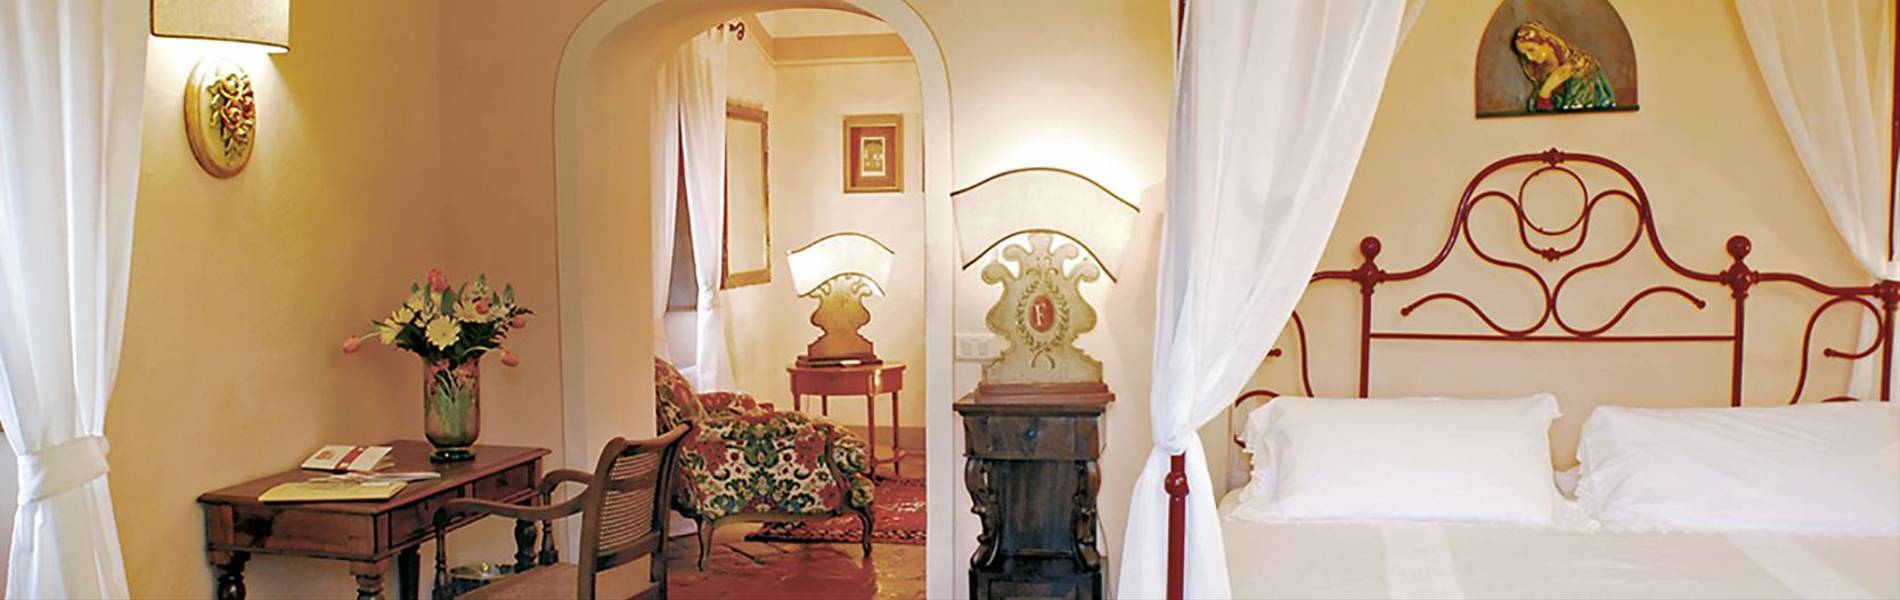 Il Falconiere, Tuscany, Italy, Suite.jpg